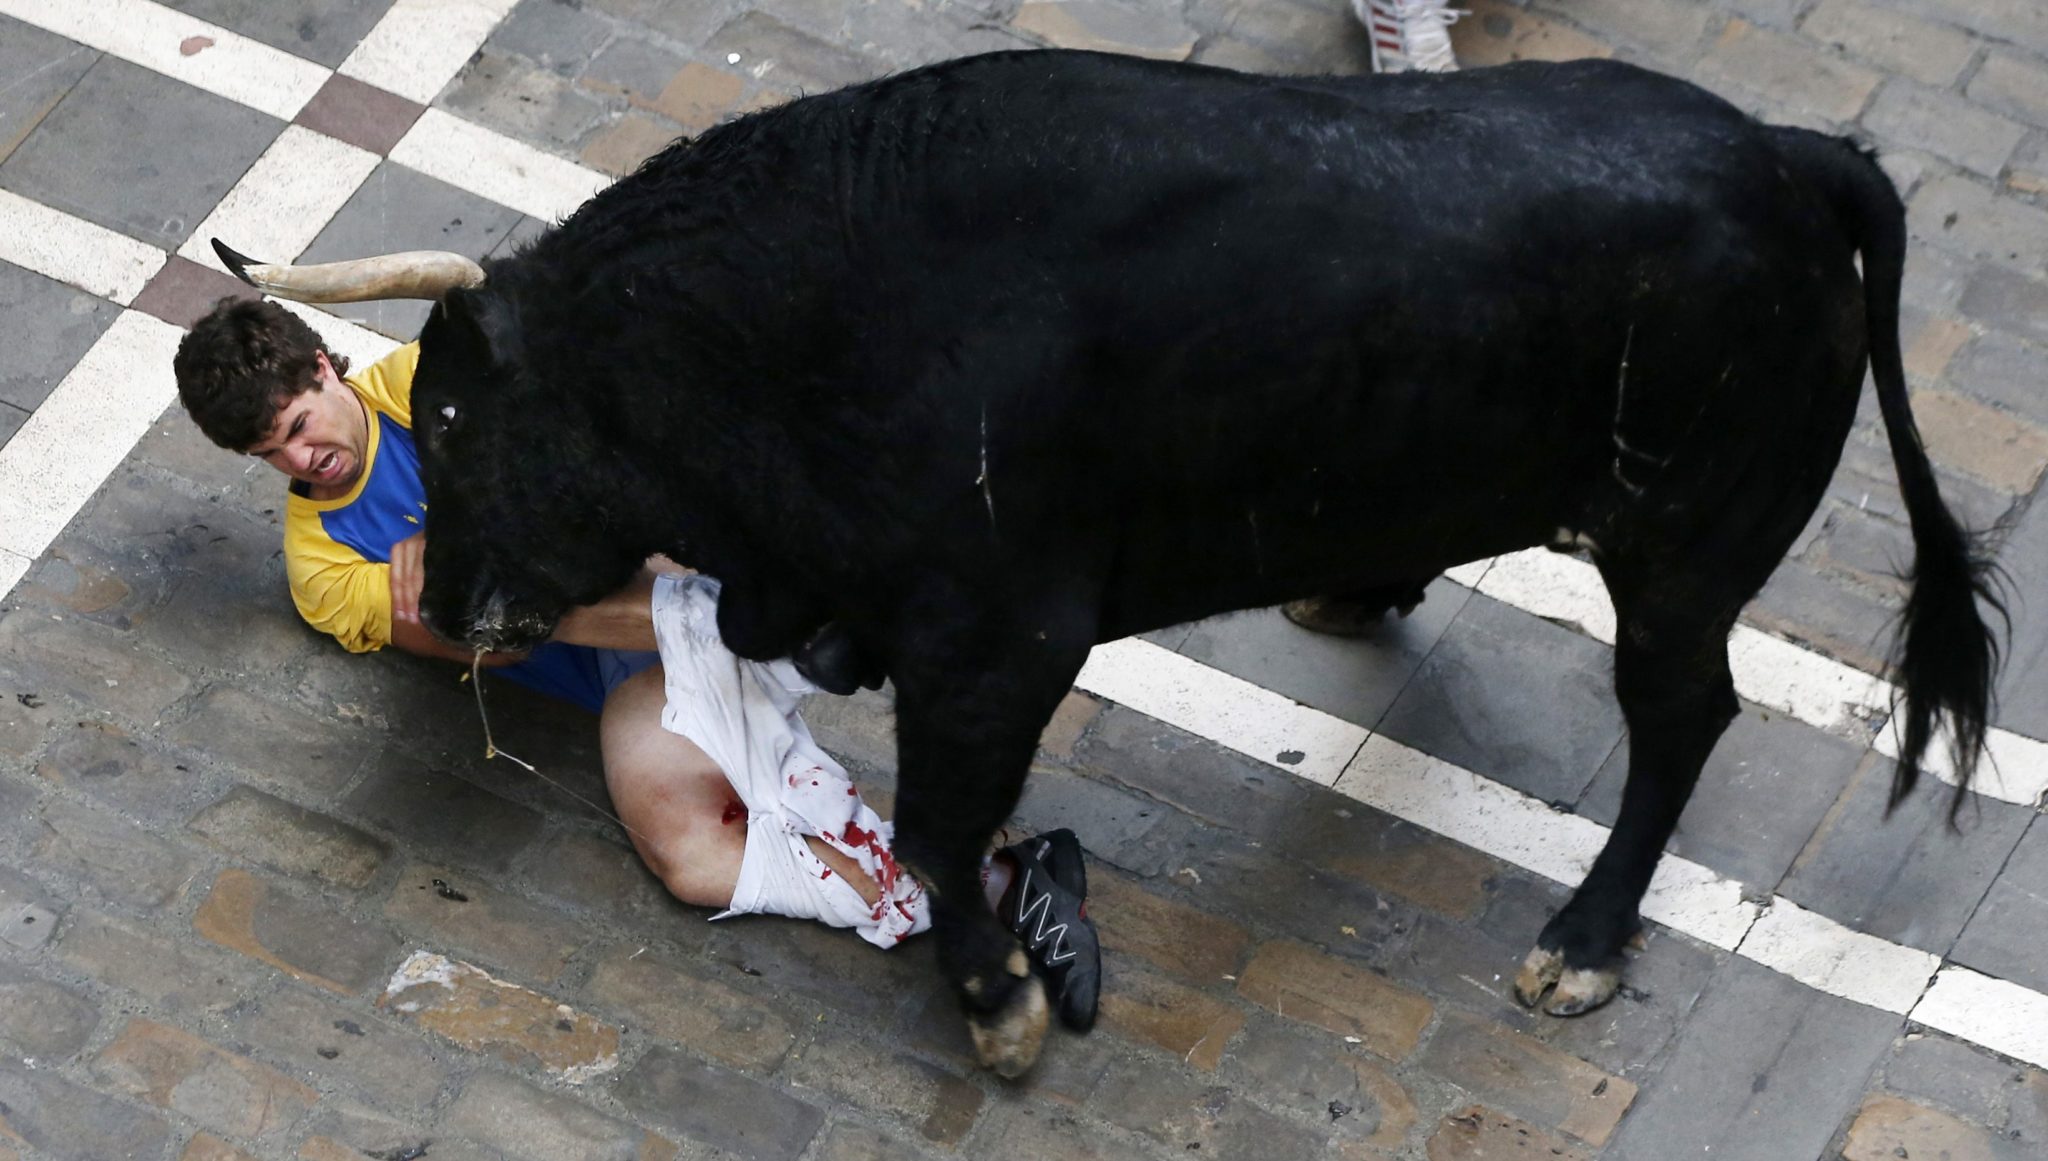 An El Pilar fighting bull charges at a runner after goring him on Estafeta street during the sixth running of the bulls of the San Fermin festival in Pamplona July 12, 2013. Four runners were gored in a run that lasted four minutes and fifty seven seconds, according to local media. The unidentified runner, a 31-year-old man from Castellon, Spain, was gored three times, according to local newspaper reports. REUTERS/Susana Vera (SPAIN - Tags: SOCIETY ANIMALS)